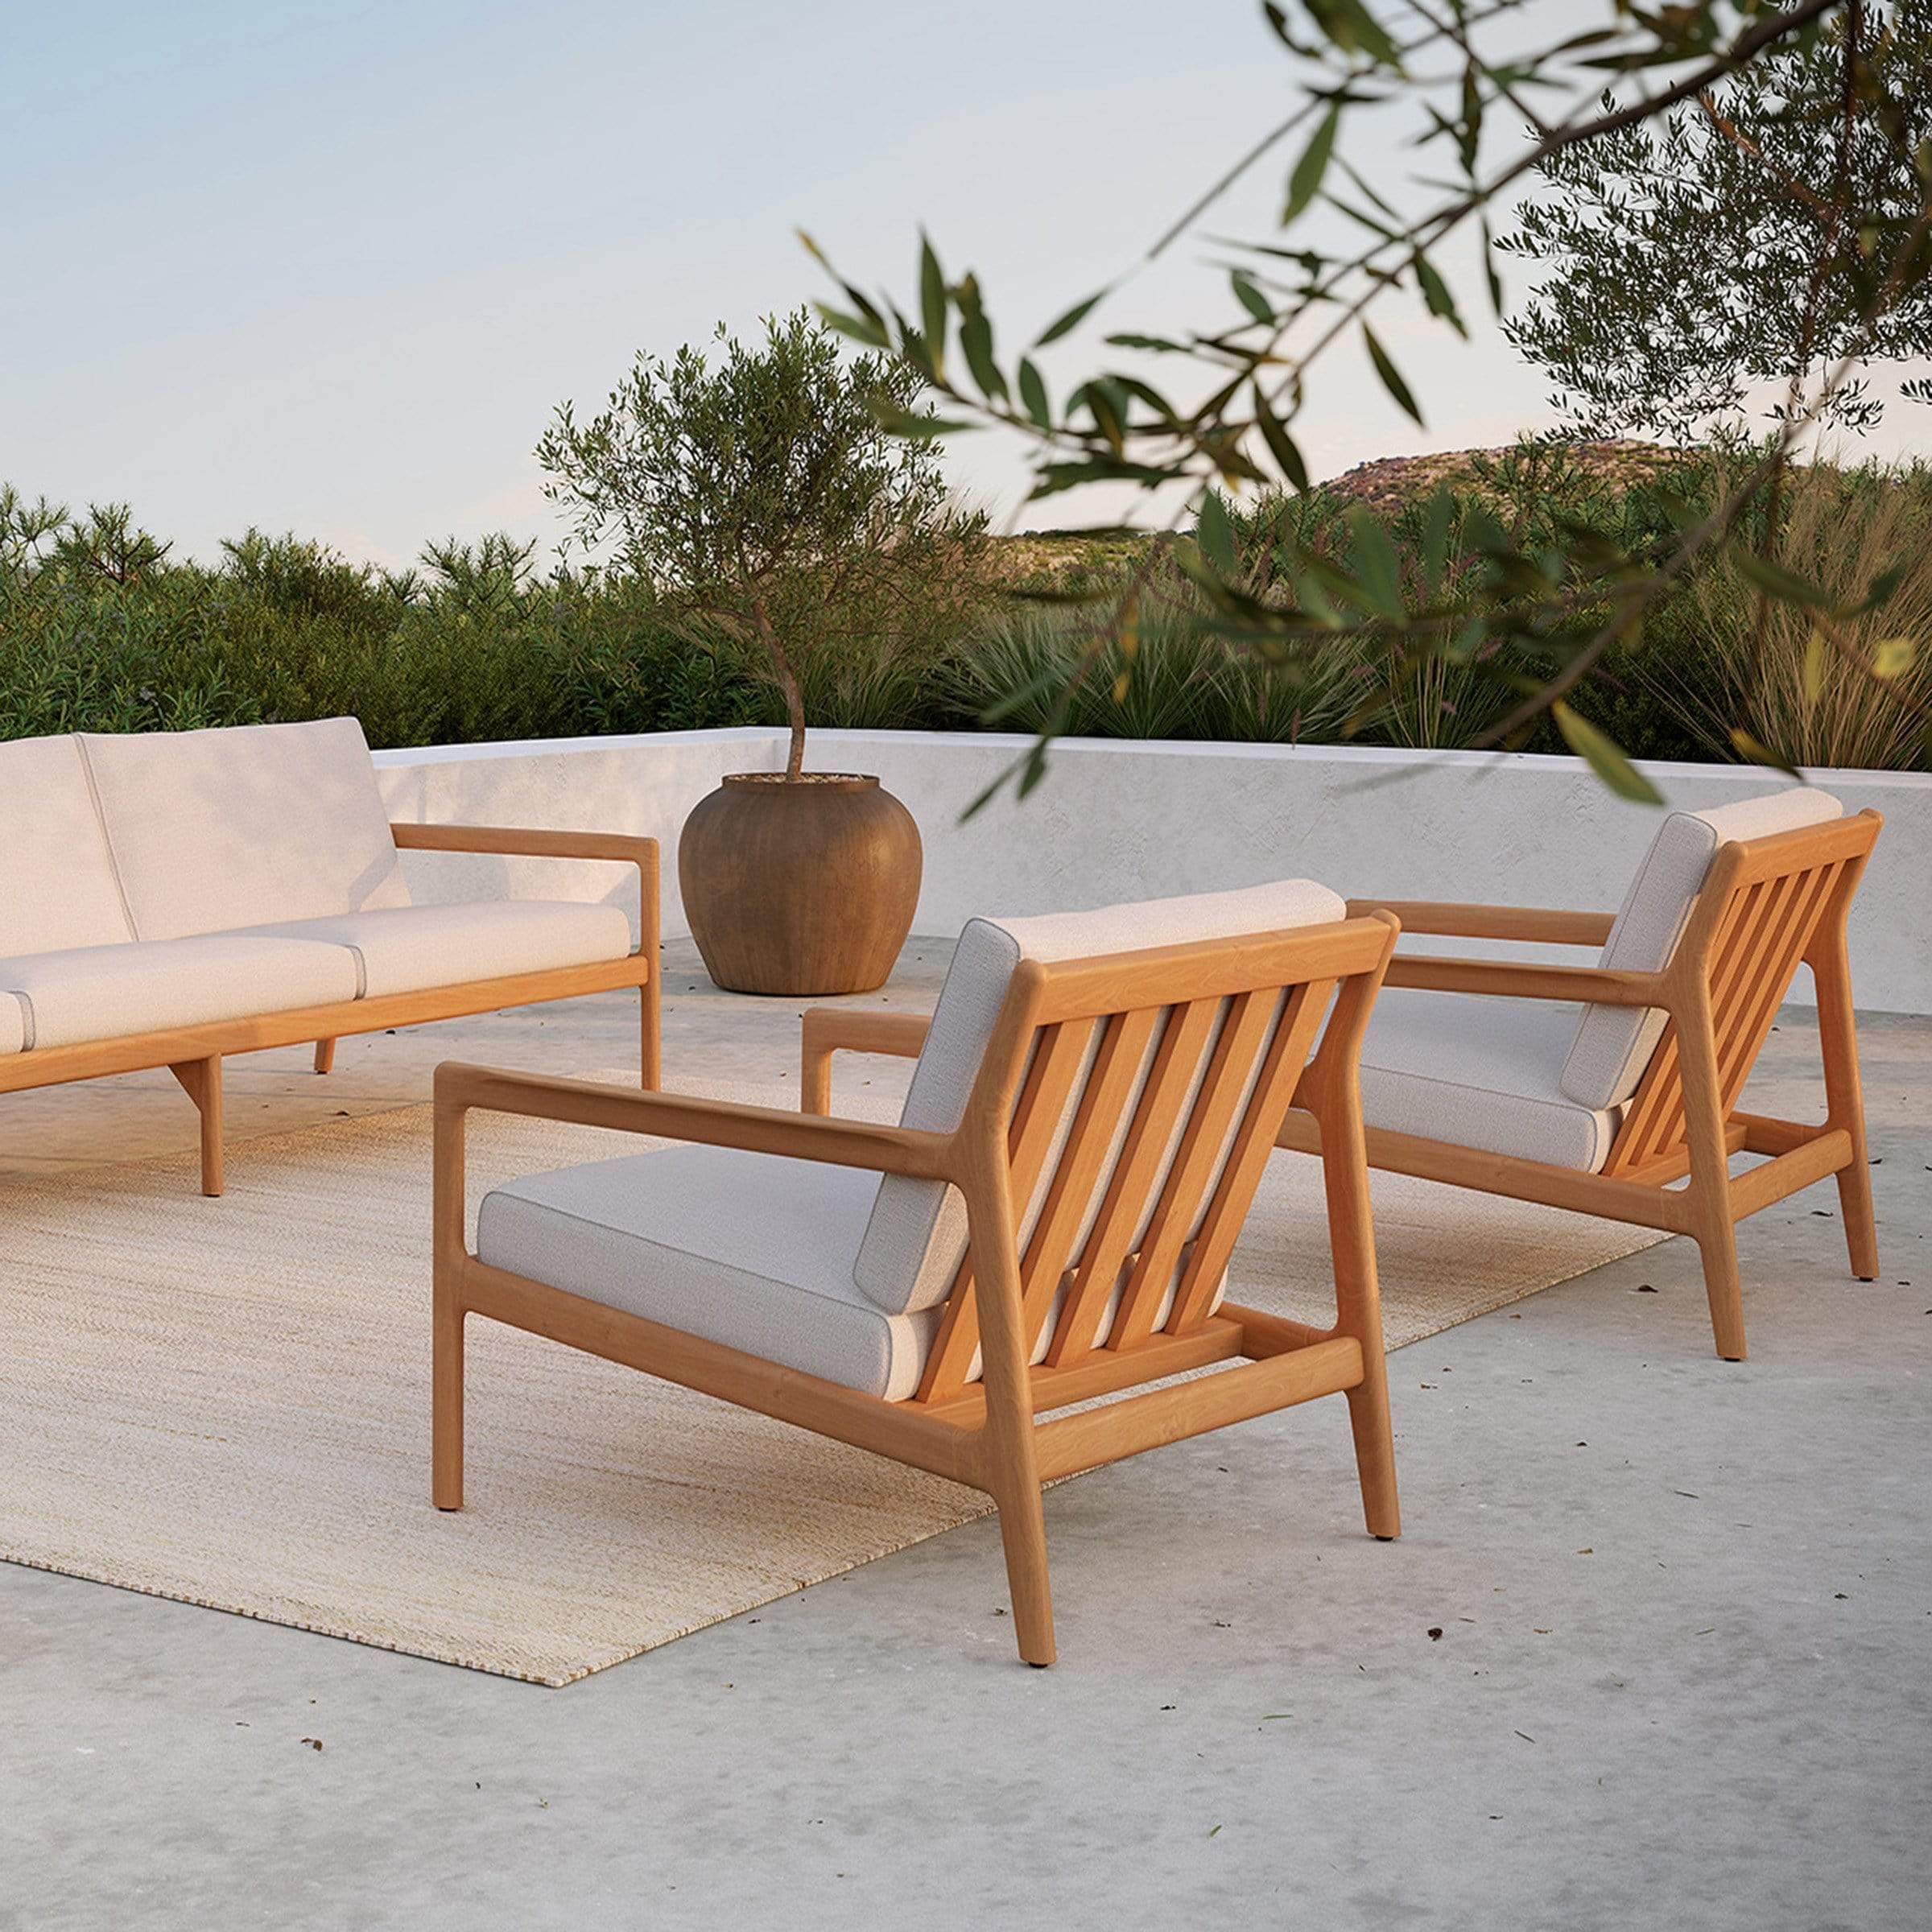 The Beauty and Durability of Teak Outdoor Furniture